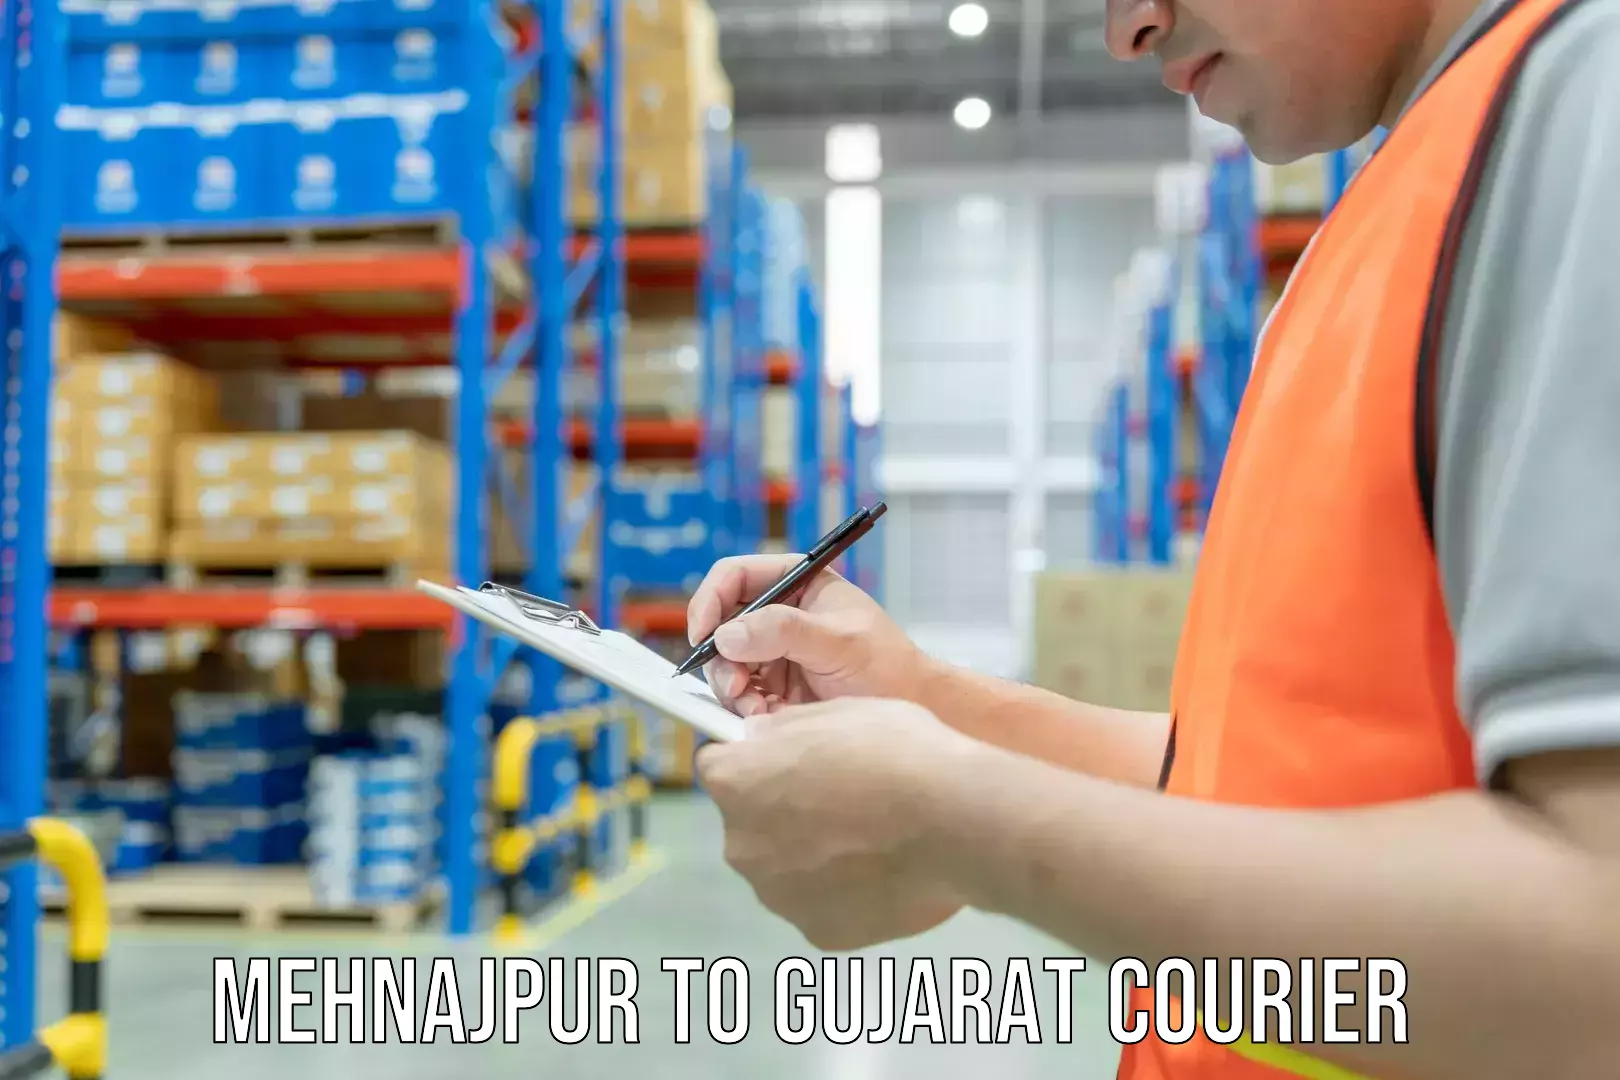 Furniture moving specialists Mehnajpur to Gujarat